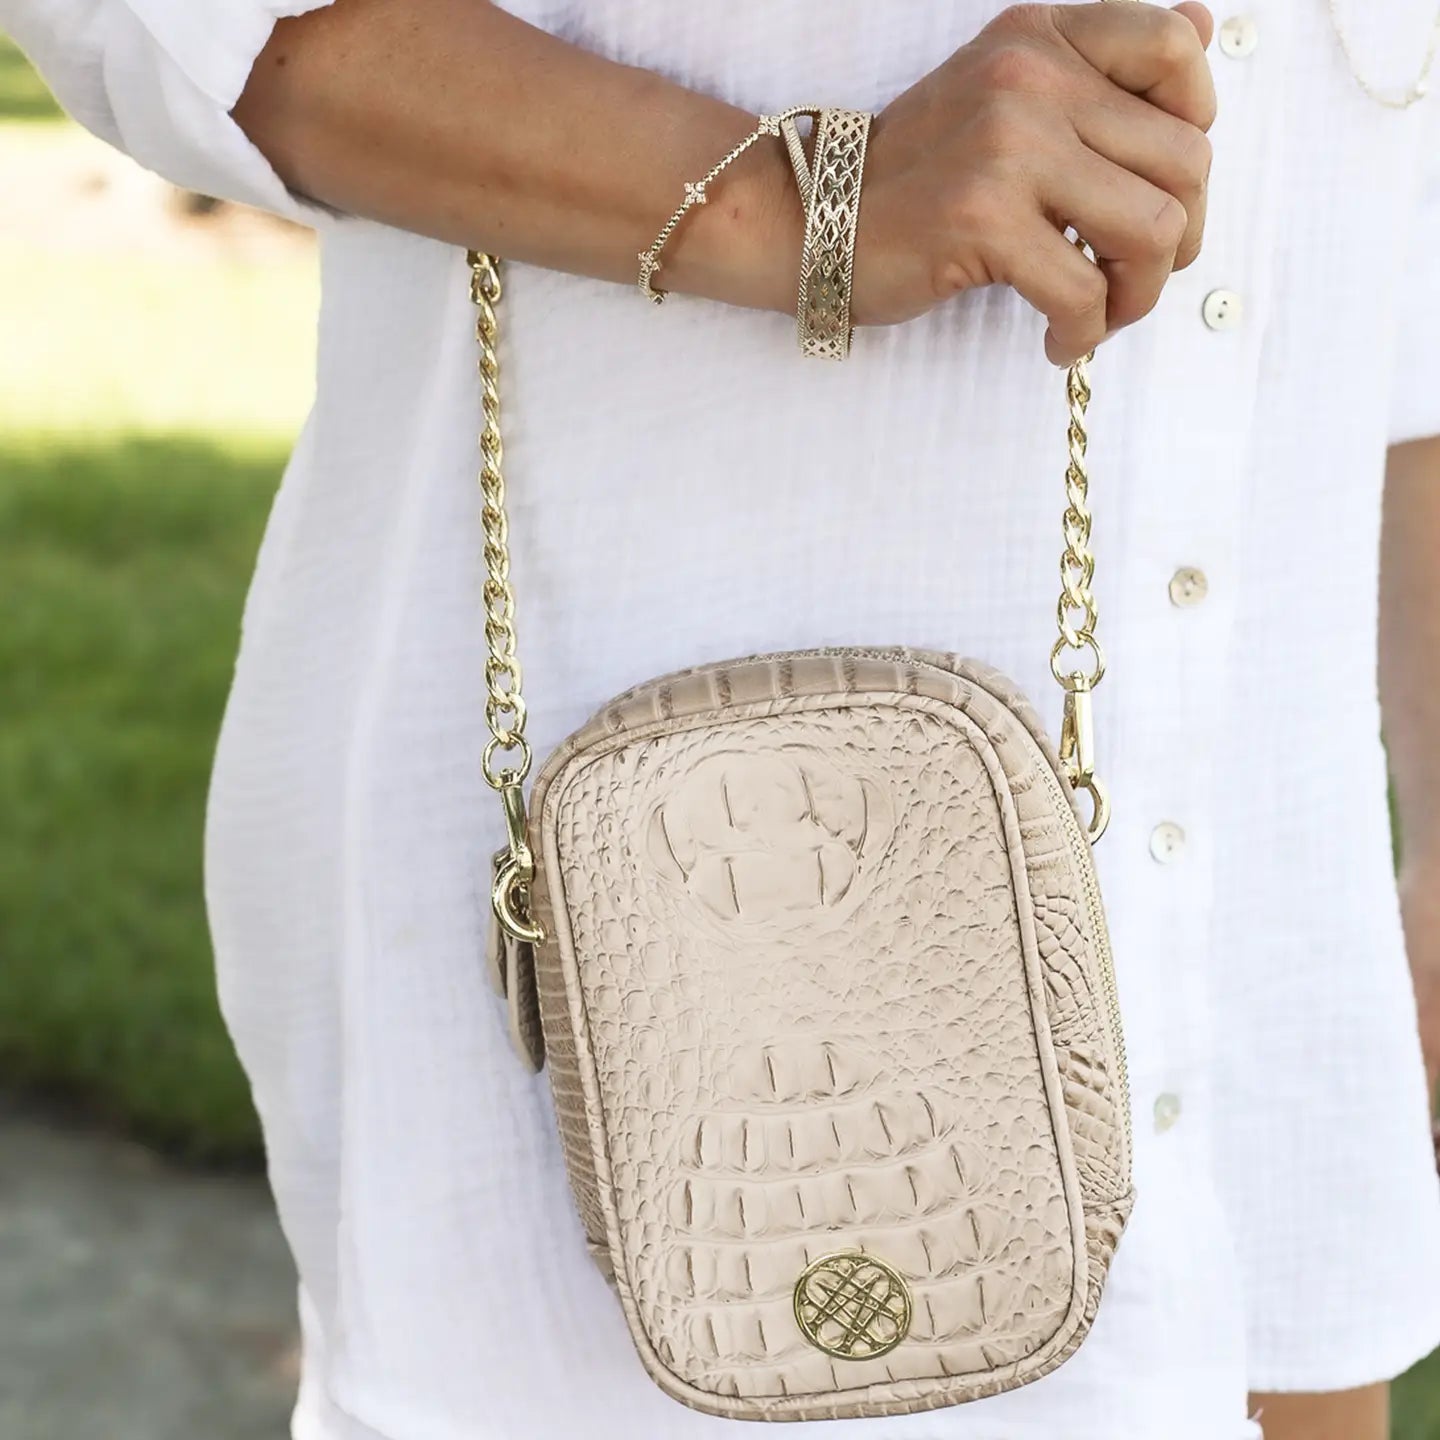 Natalie Wood - Grace Crossbody in Gold Metallic-130 Accessories-Natalie Wood-July & June Women's Fashion Boutique Located in San Antonio, Texas